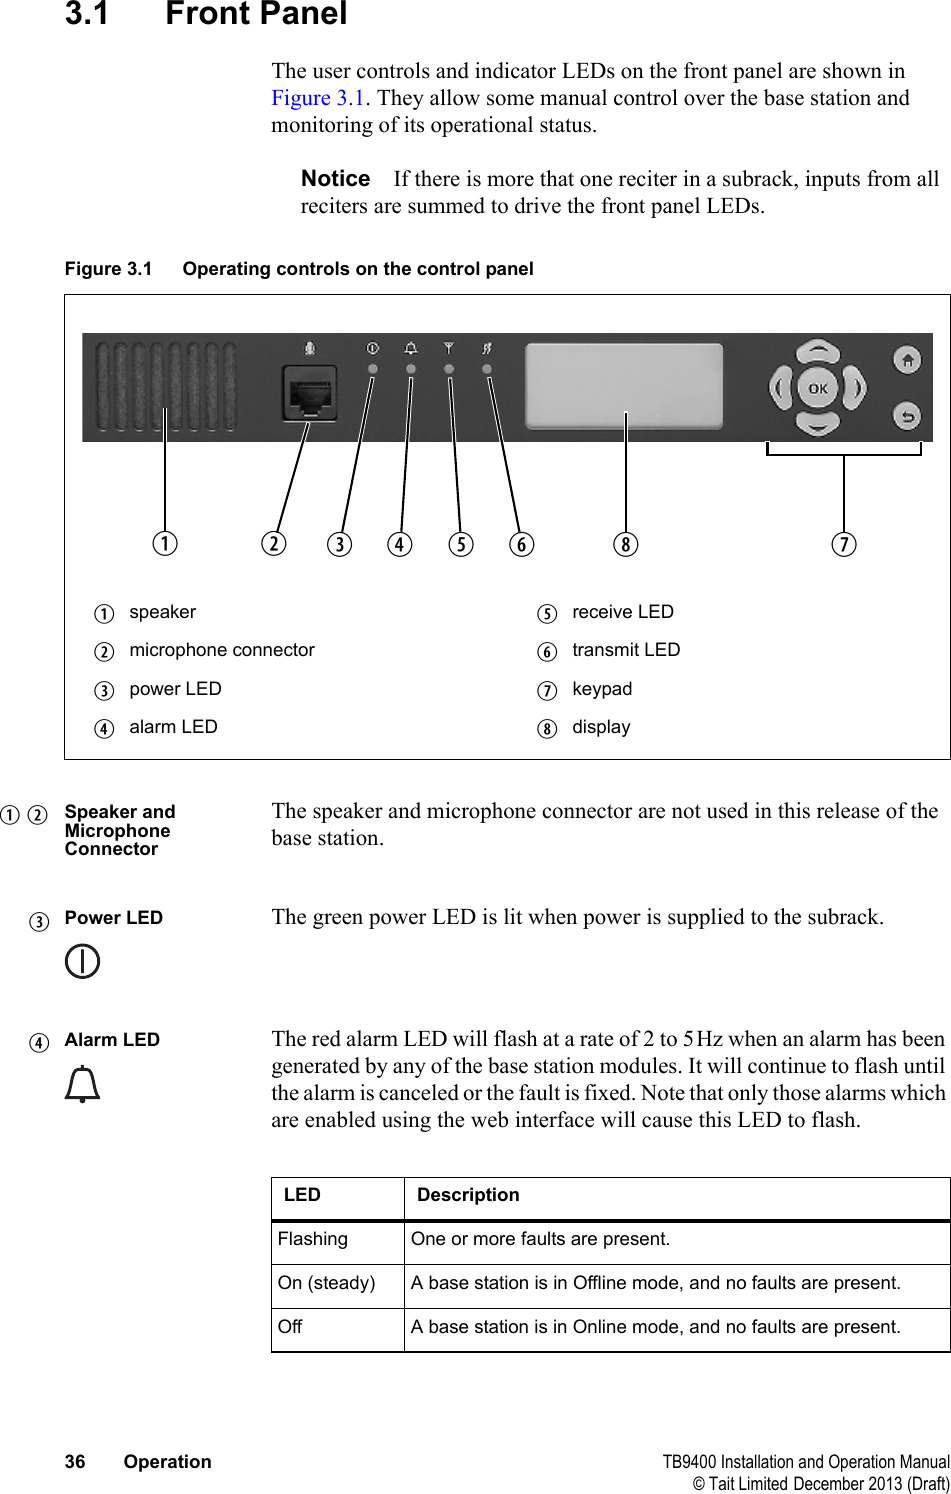  36 Operation TB9400 Installation and Operation Manual© Tait Limited December 2013 (Draft)3.1 Front PanelThe user controls and indicator LEDs on the front panel are shown in Figure 3.1. They allow some manual control over the base station and monitoring of its operational status.Notice If there is more that one reciter in a subrack, inputs from all reciters are summed to drive the front panel LEDs.Speaker and Microphone ConnectorThe speaker and microphone connector are not used in this release of the base station.Power LED The green power LED is lit when power is supplied to the subrack.Alarm LED The red alarm LED will flash at a rate of 2 to 5Hz when an alarm has been generated by any of the base station modules. It will continue to flash until the alarm is canceled or the fault is fixed. Note that only those alarms which are enabled using the web interface will cause this LED to flash.Figure 3.1 Operating controls on the control panelbspeaker freceive LEDcmicrophone connector gtransmit LEDdpower LED hkeypadealarm LED idisplaybcdefgi hb cdeLED DescriptionFlashing One or more faults are present.On (steady) A base station is in Offline mode, and no faults are present.Off A base station is in Online mode, and no faults are present.